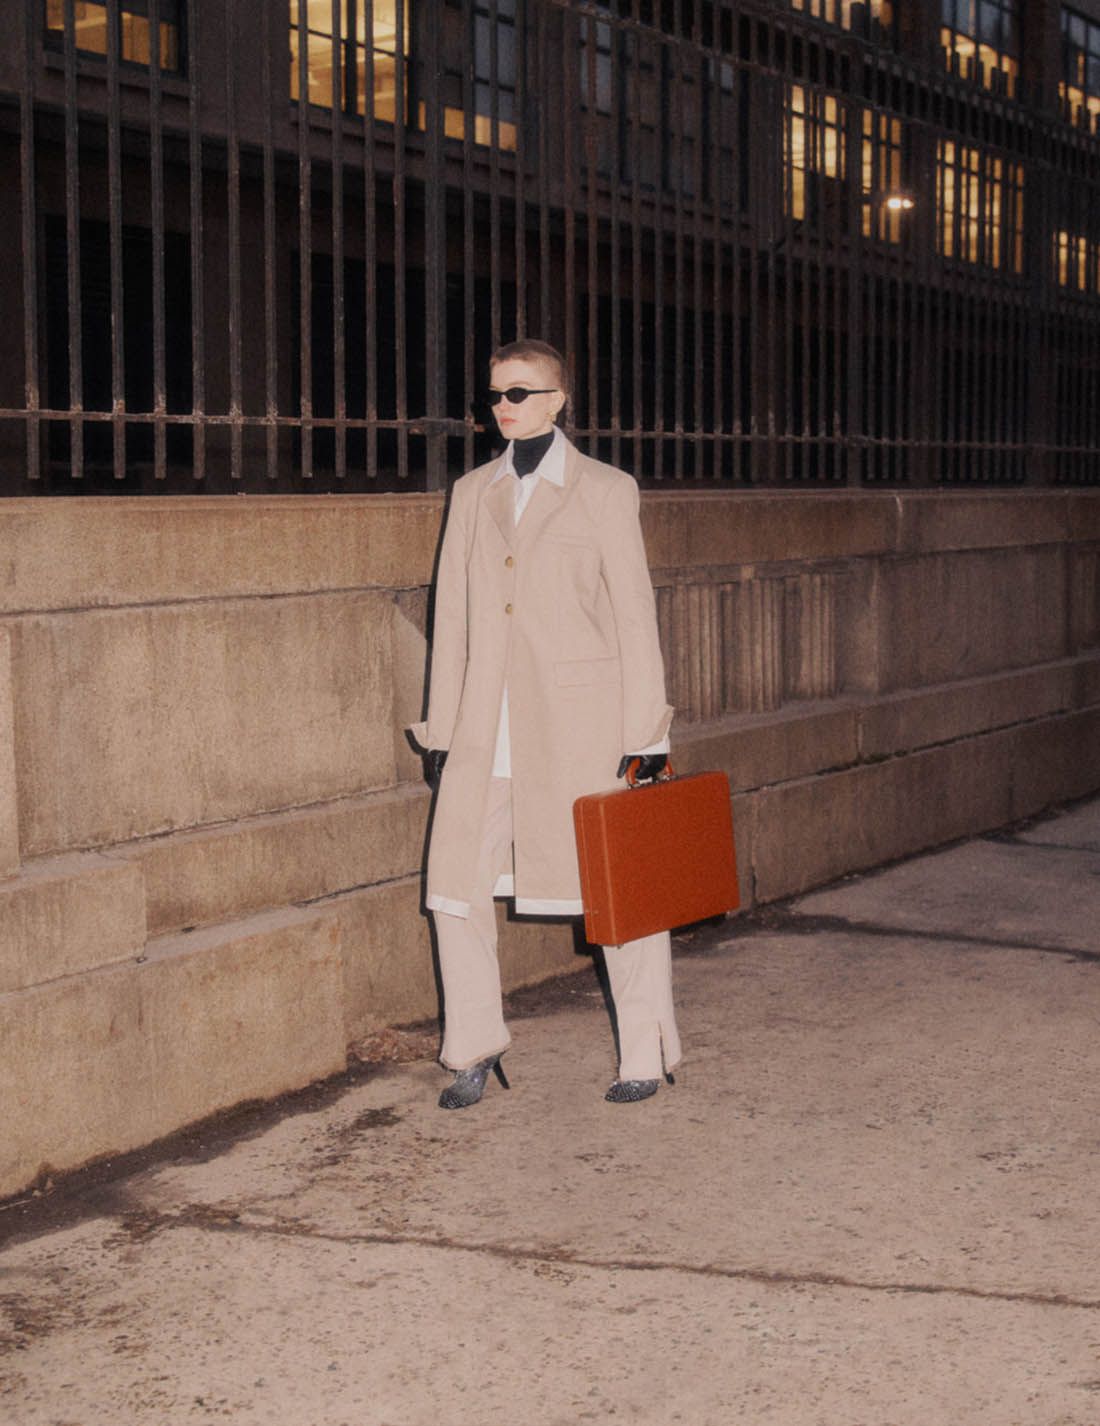 Clothing & Accessories: COMMISSION Beige Pleated wool-twill straight-leg pants / Coat, Shirt by Commission; Boots, Earrings by Balenciaga; Sunglasses by Andy Wolf. Photographer: Nagi Sakai. Stylist: Natasha Royt. Hair Stylist: Pasquale Ferrante. Makeup Artist: Ingeborg